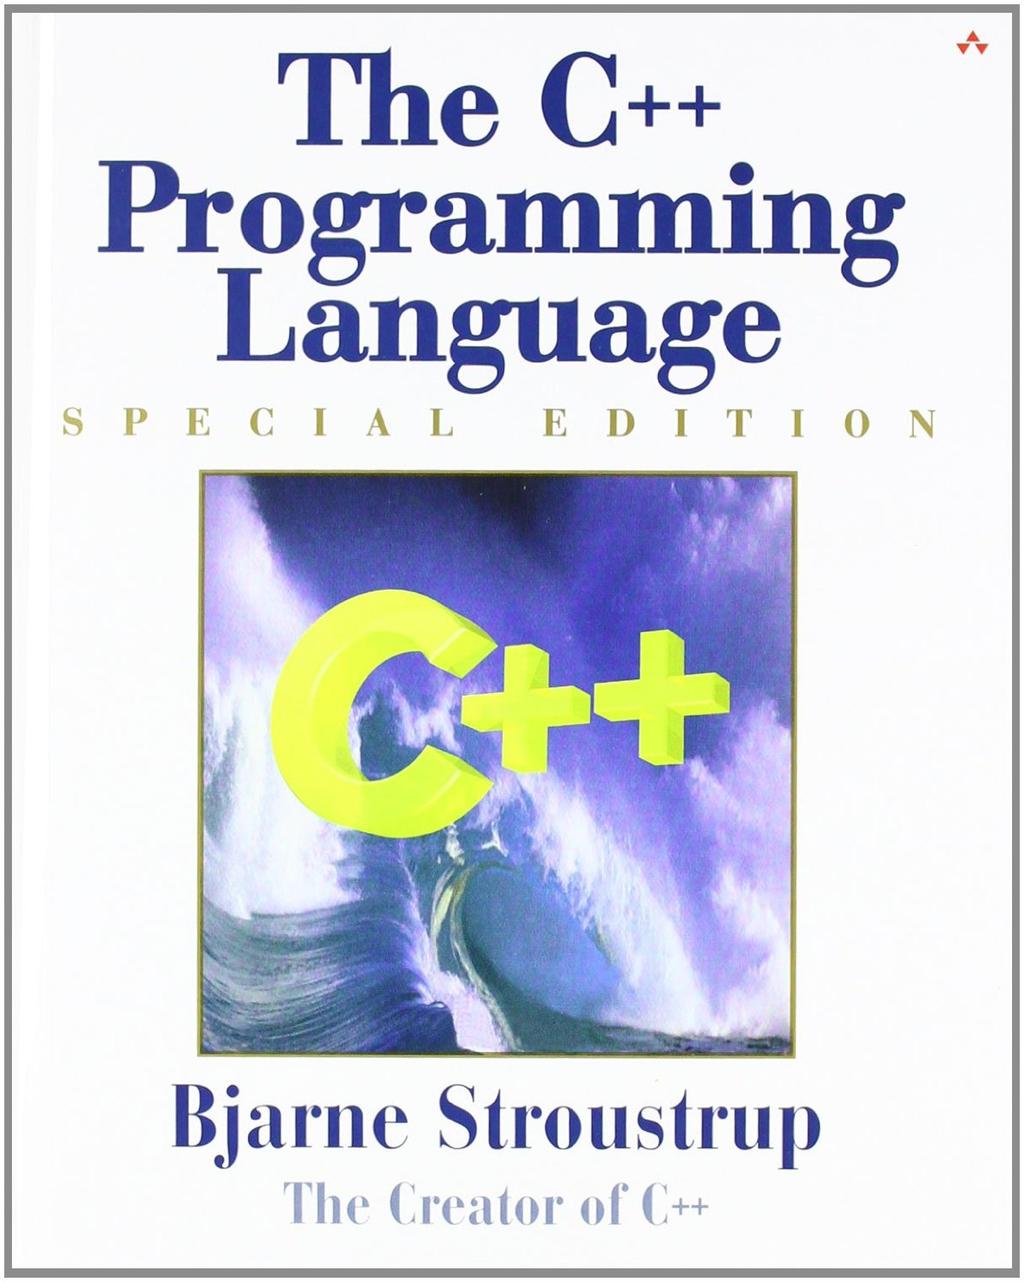 The C++ programming language Developed in the 1980s by Bjarne Stroustrup as object-oriented extension to C.